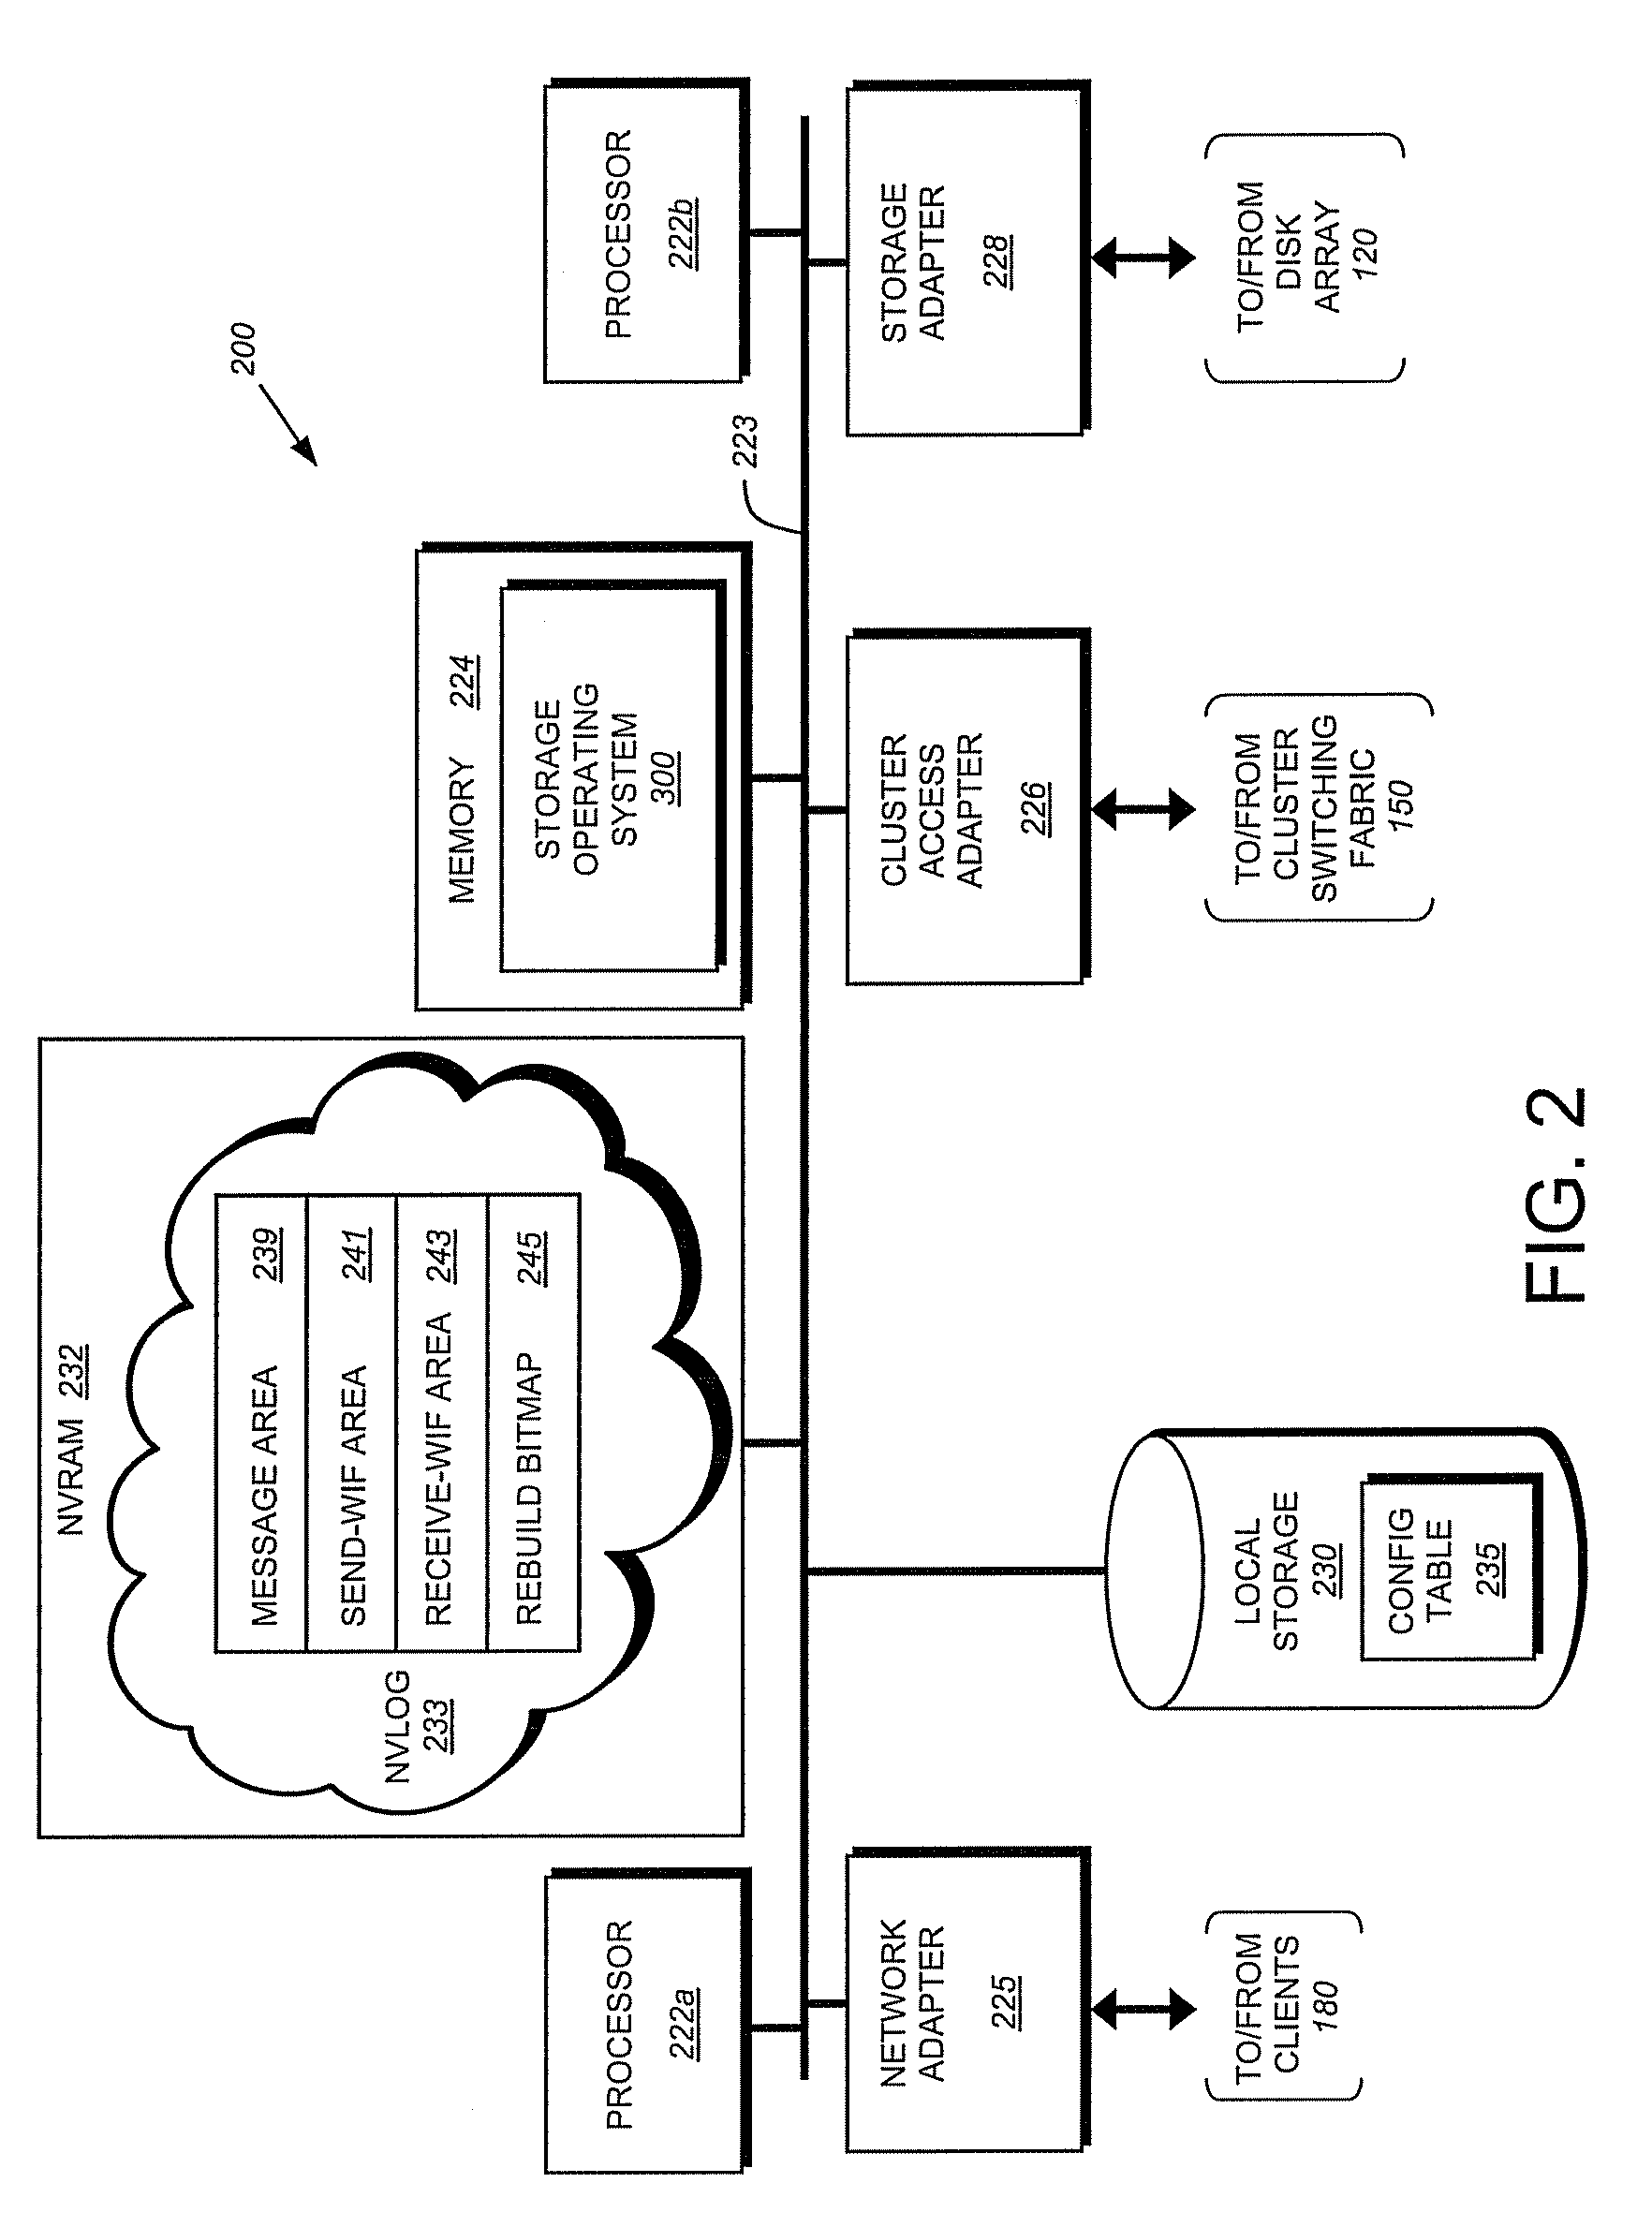 System and method for redundancy-protected aggregates